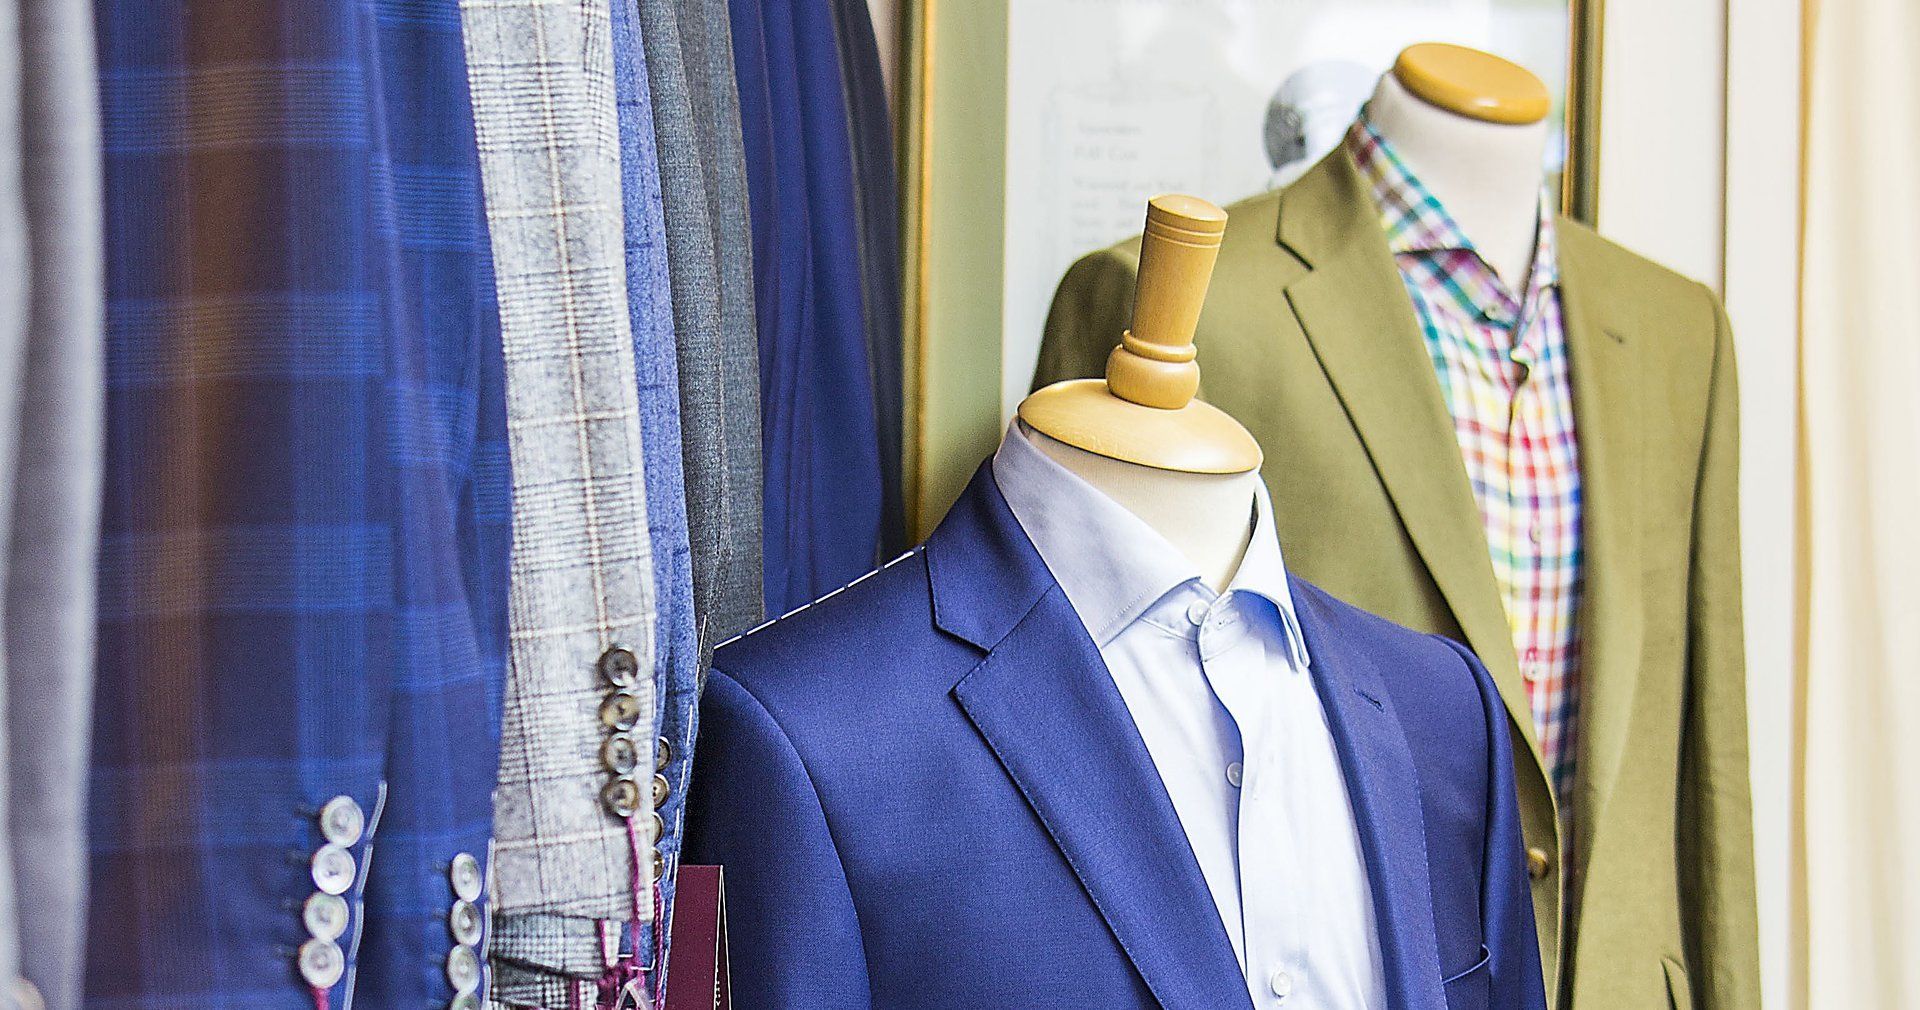 suits in every color - pictured here: royal blue, olive green